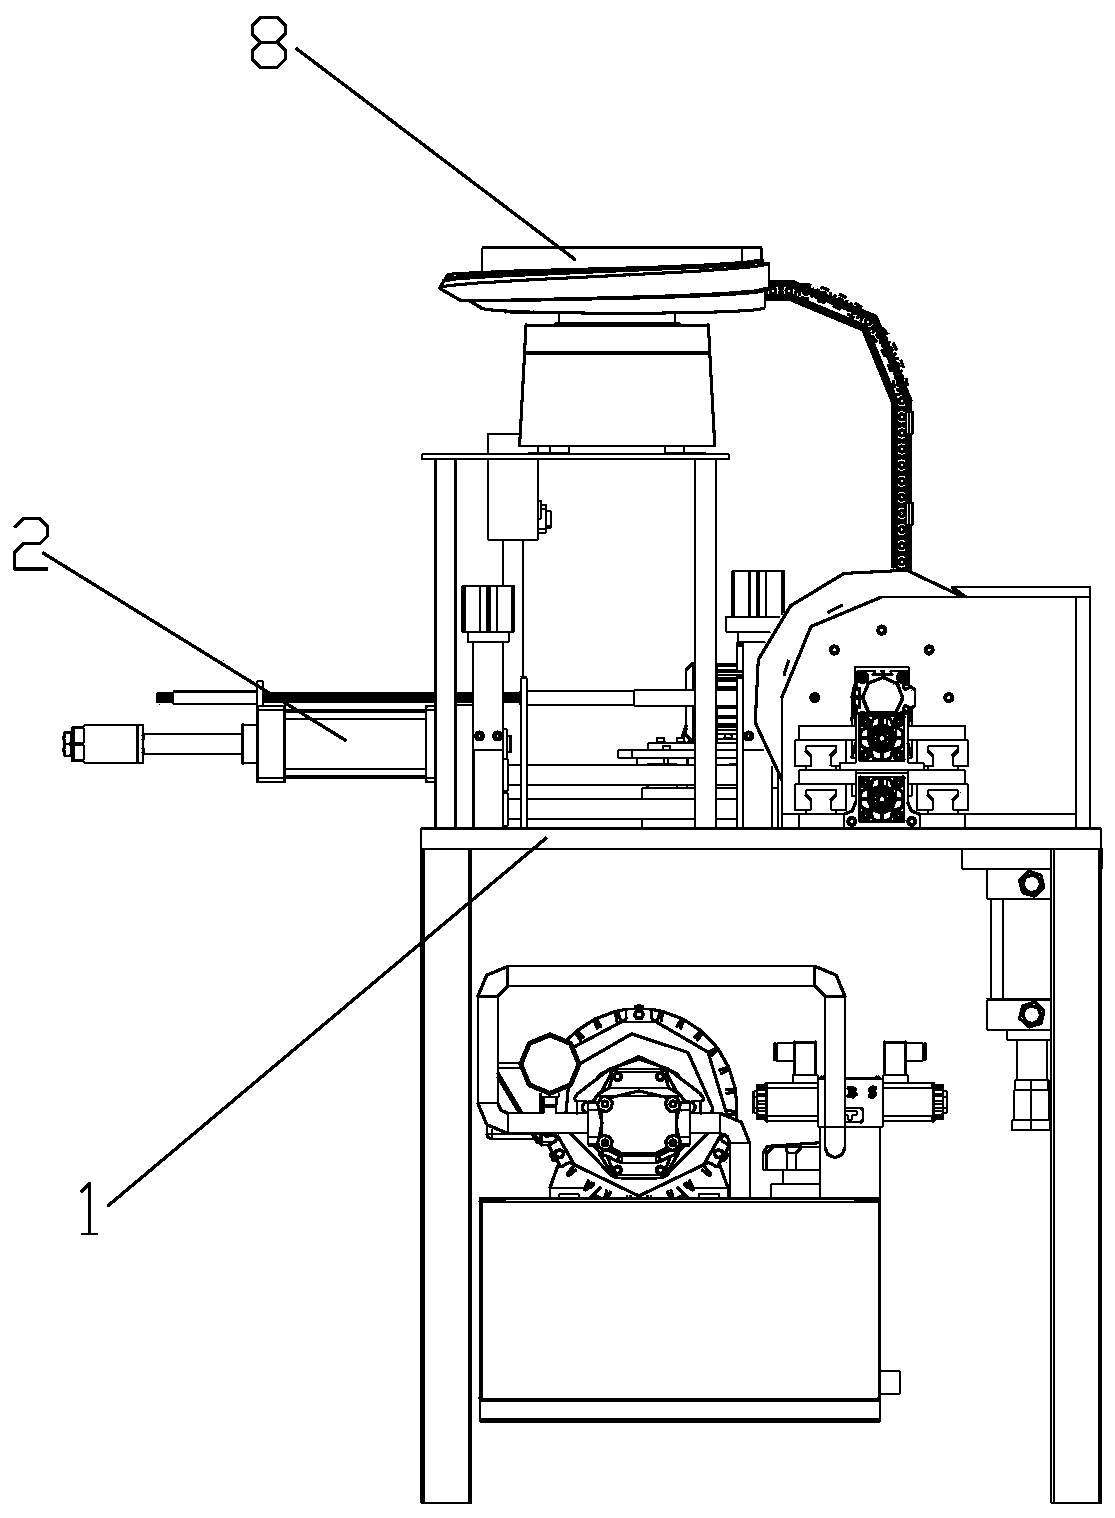 An automatic steel wire brush machine